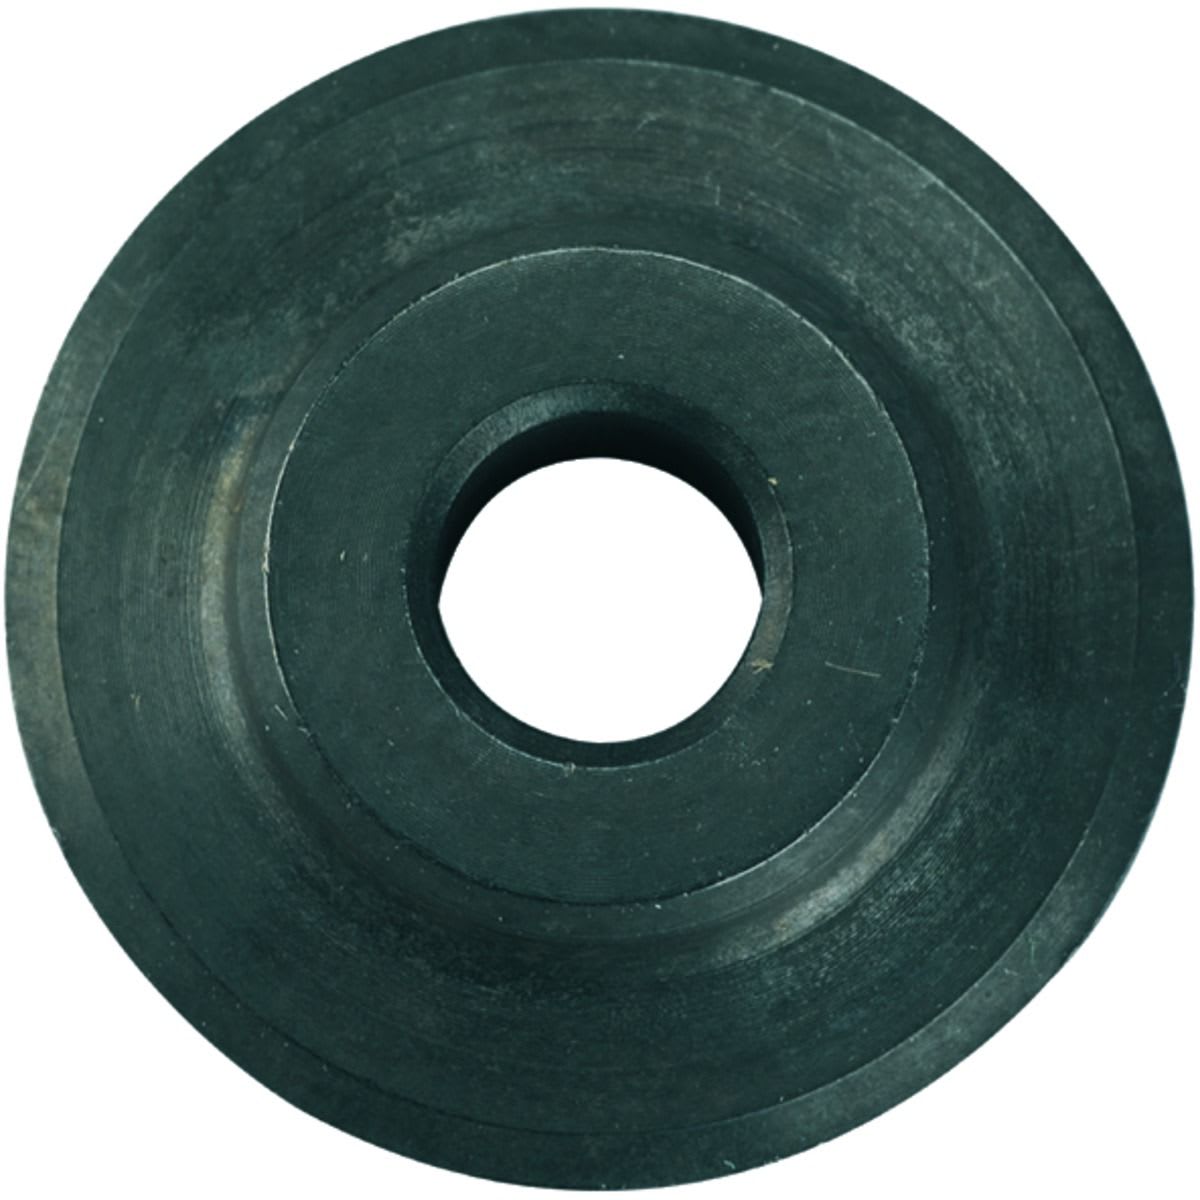 Wickes Spare Wheels For Ratchet Tube Cutter -